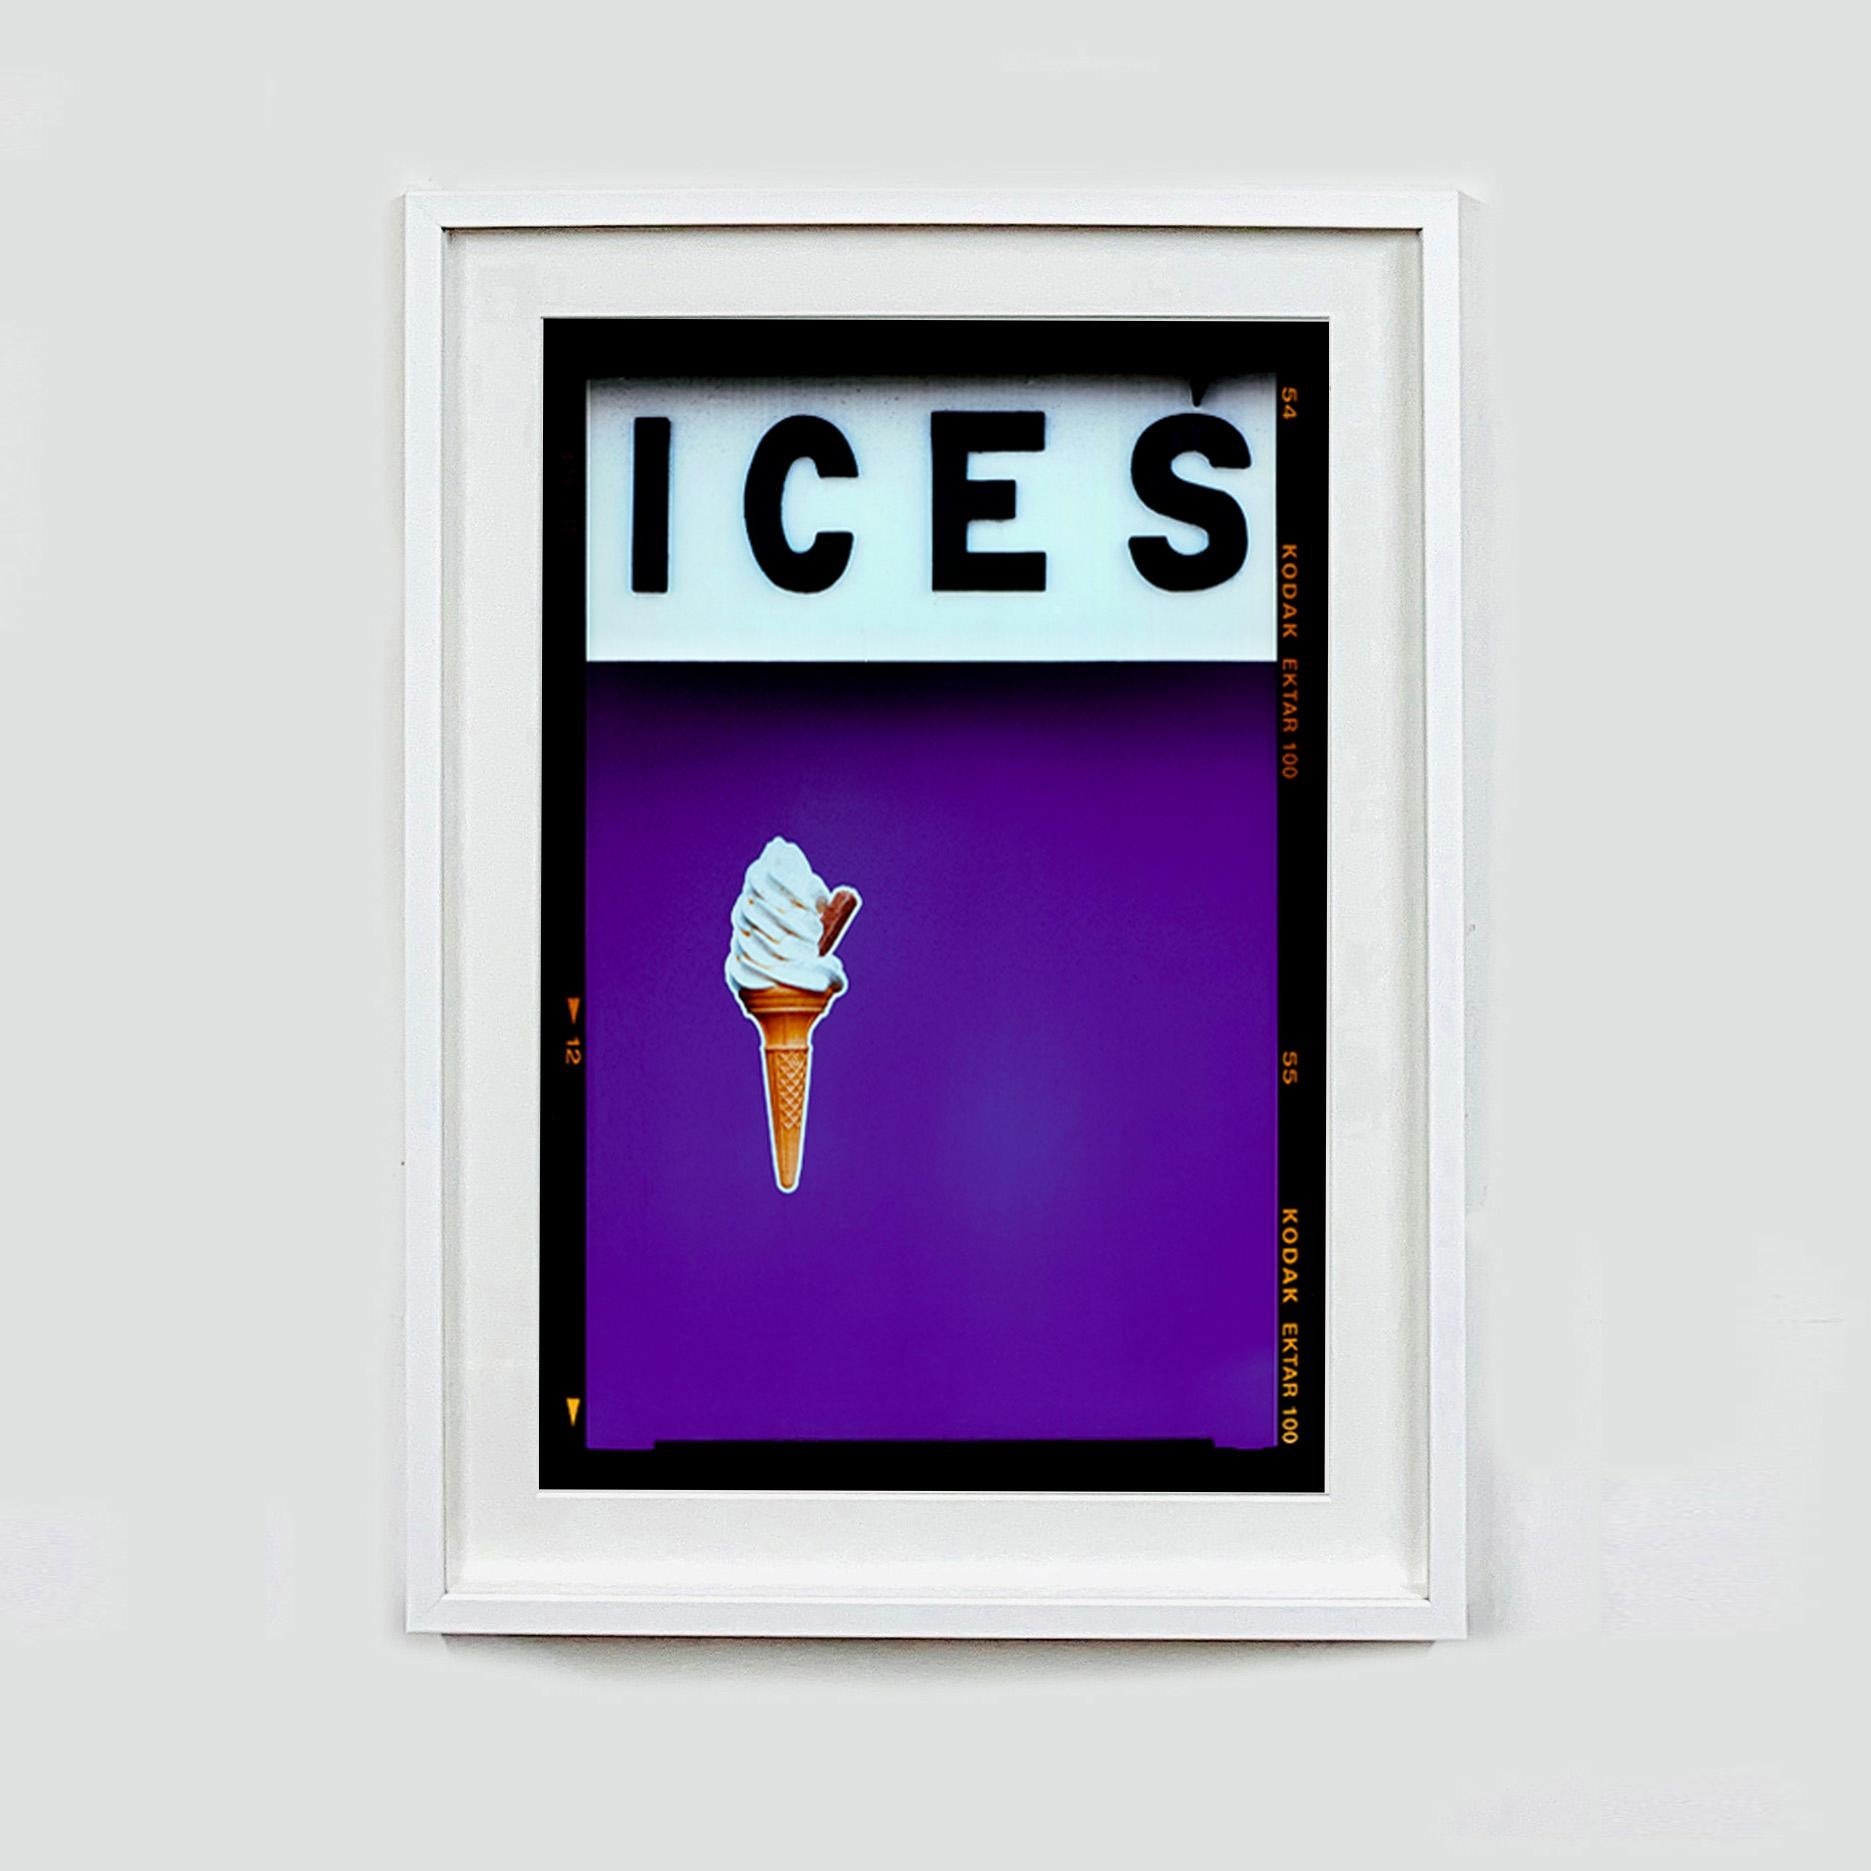 Ices (Purple), Bexhill-on-Sea - British seaside color photography - Contemporary Photograph by Richard Heeps